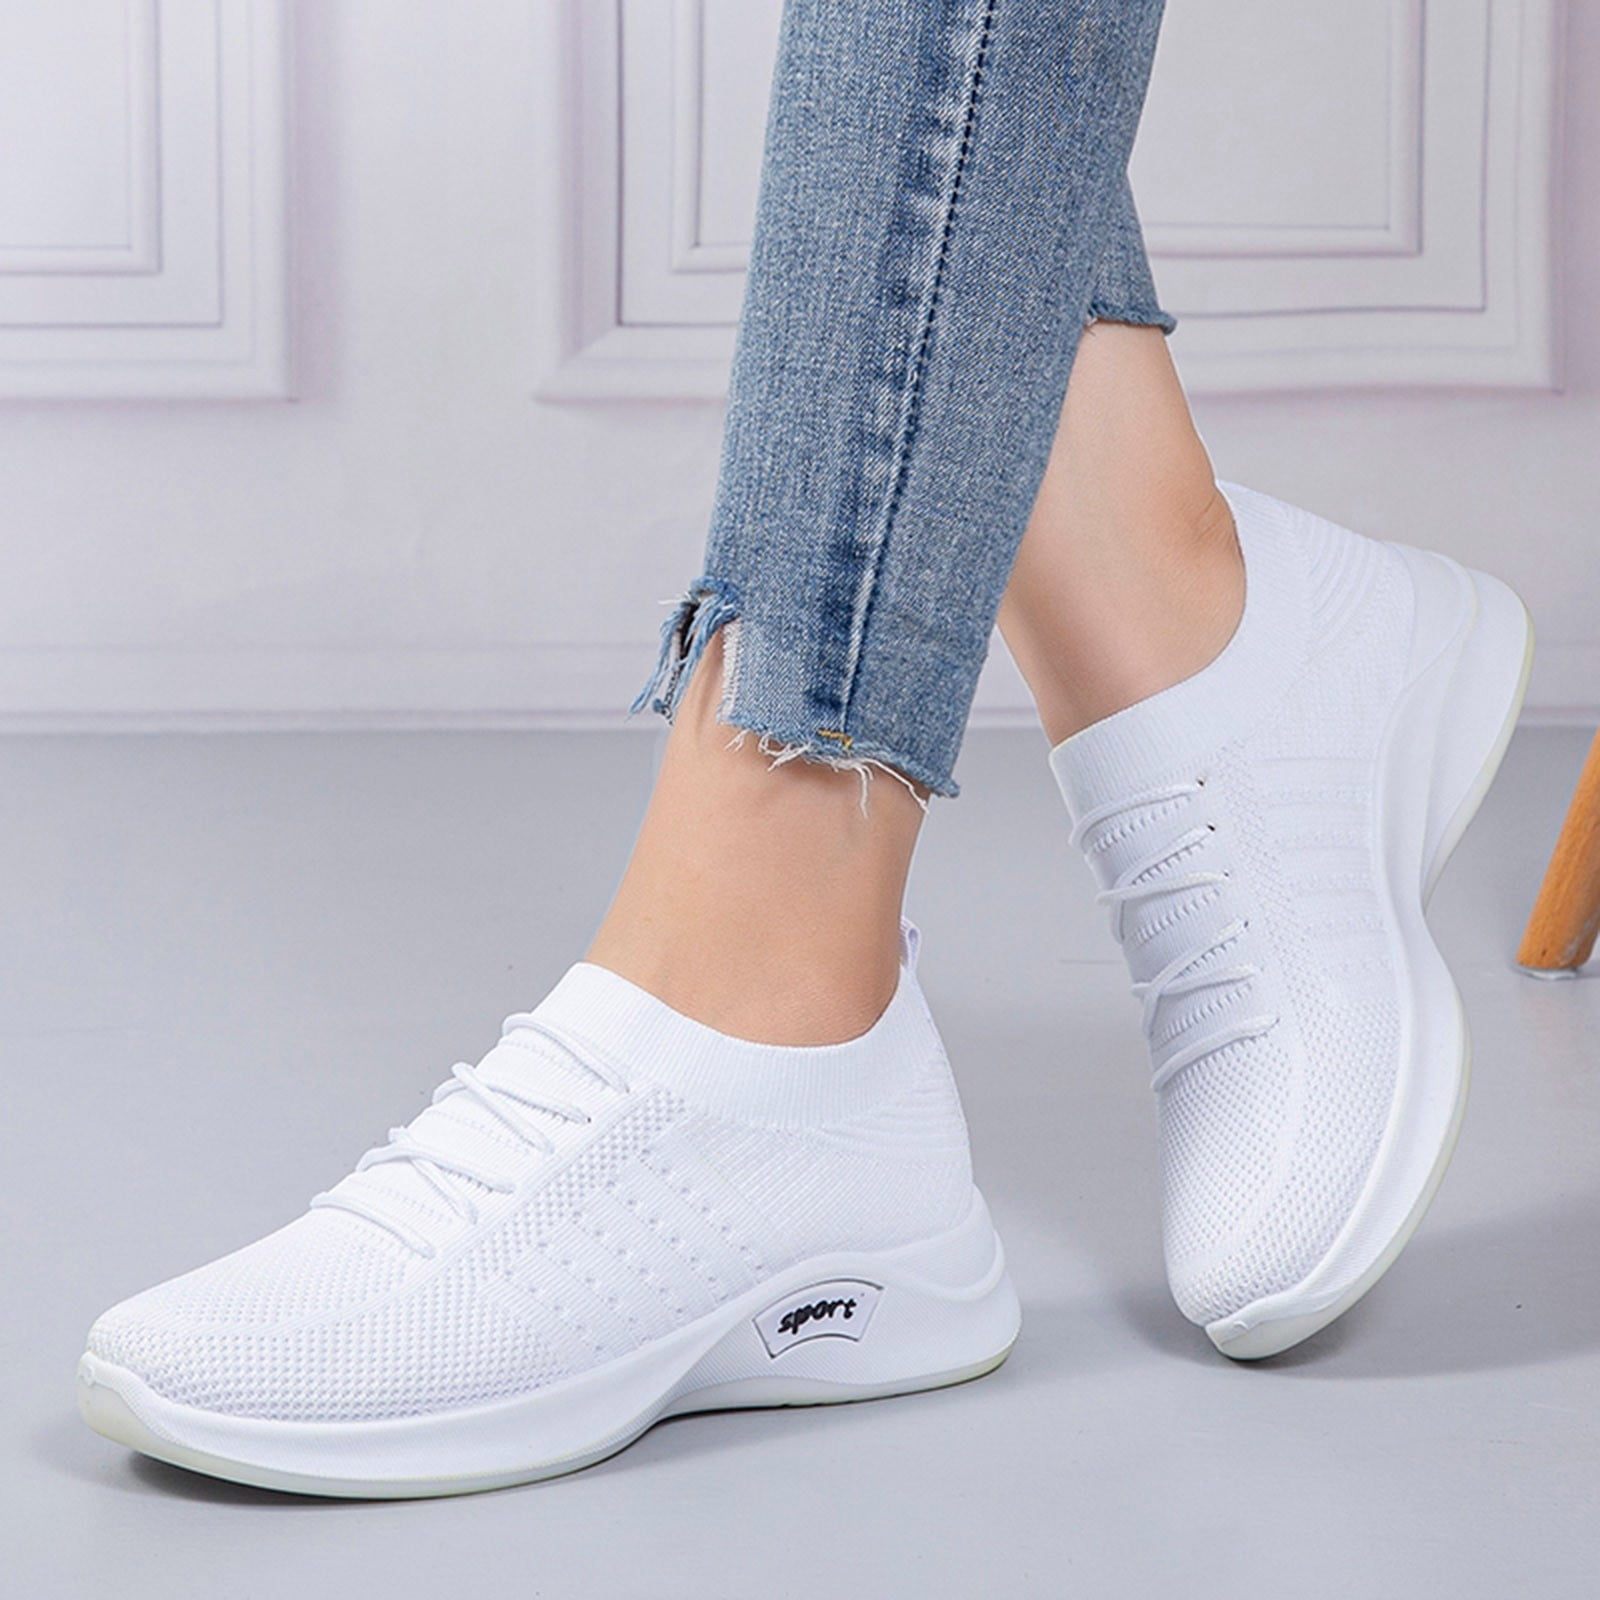 Ladies Shoes Fashion Shoes Comfortable Lace Up Mesh Breathable Casual Sneakers Walmart.com